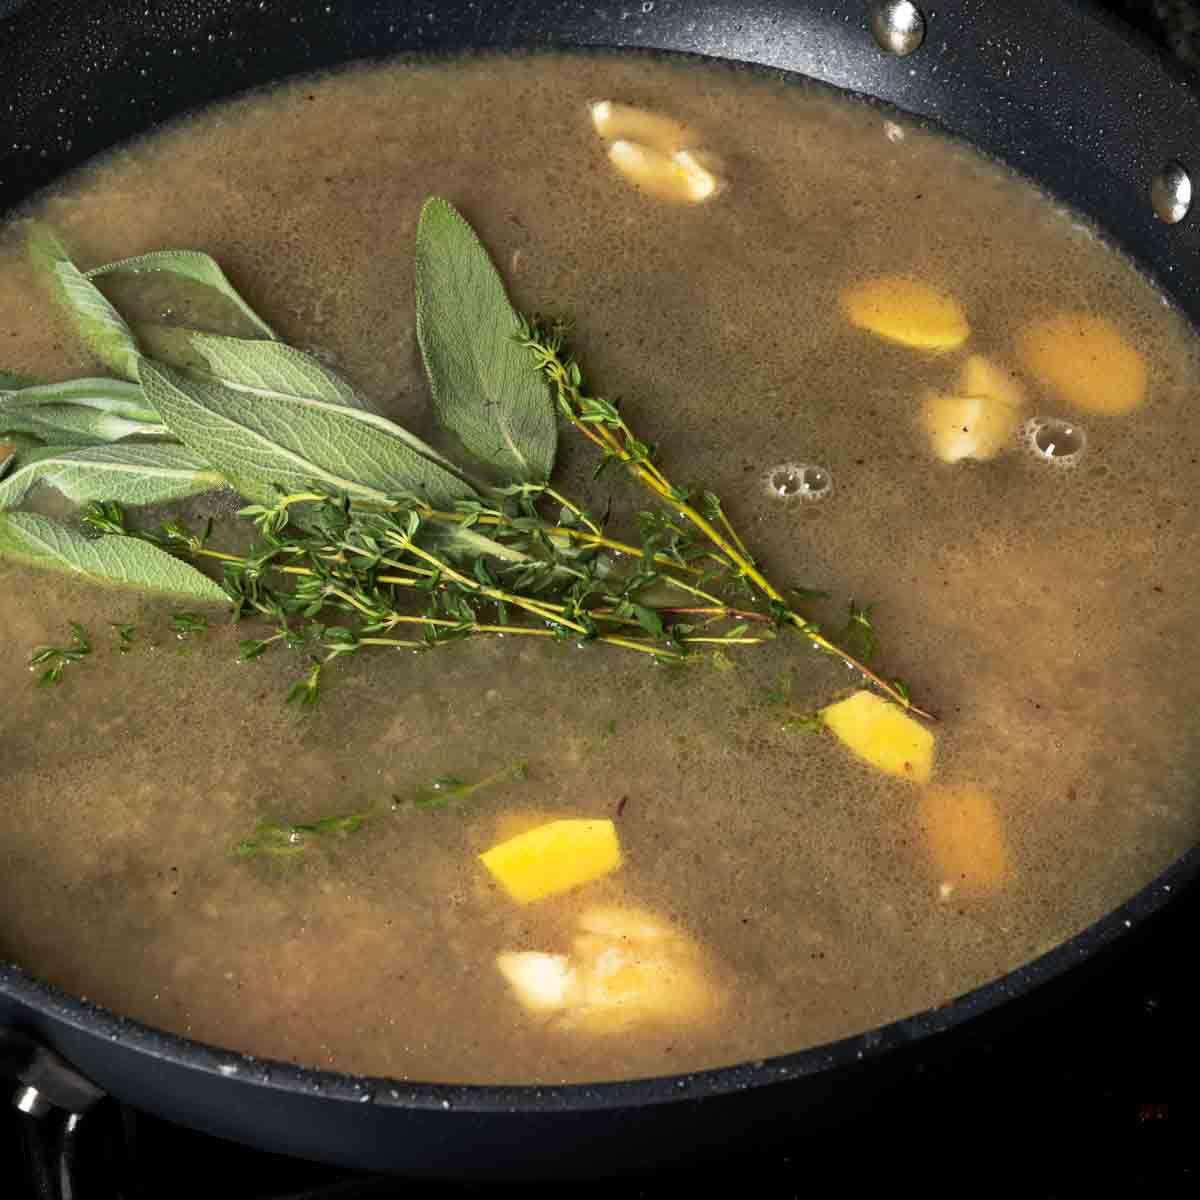 Bringing the cider braising liquid and aromatics to a simmer.